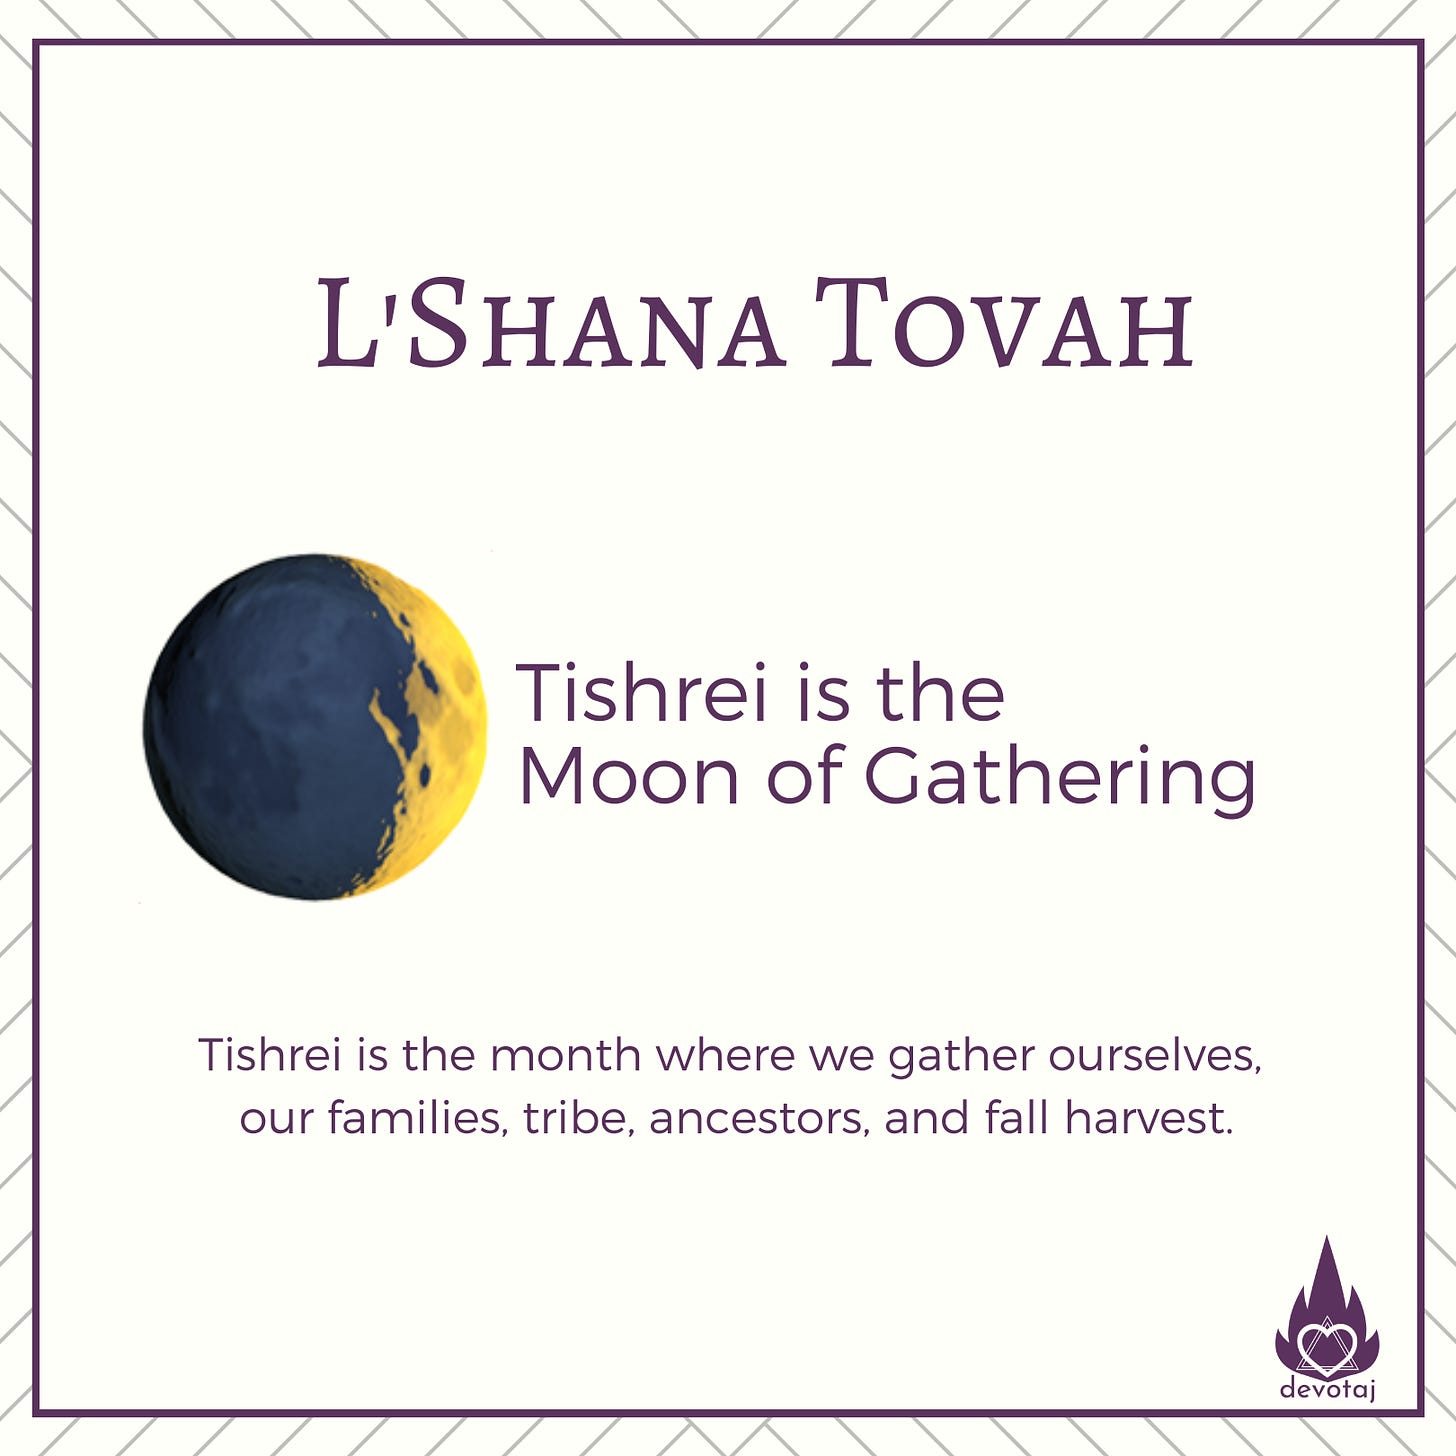 Tishrei is the moon of gathering. It is the month where we gather ourselves, our families, ancestors, and the fall harvest.